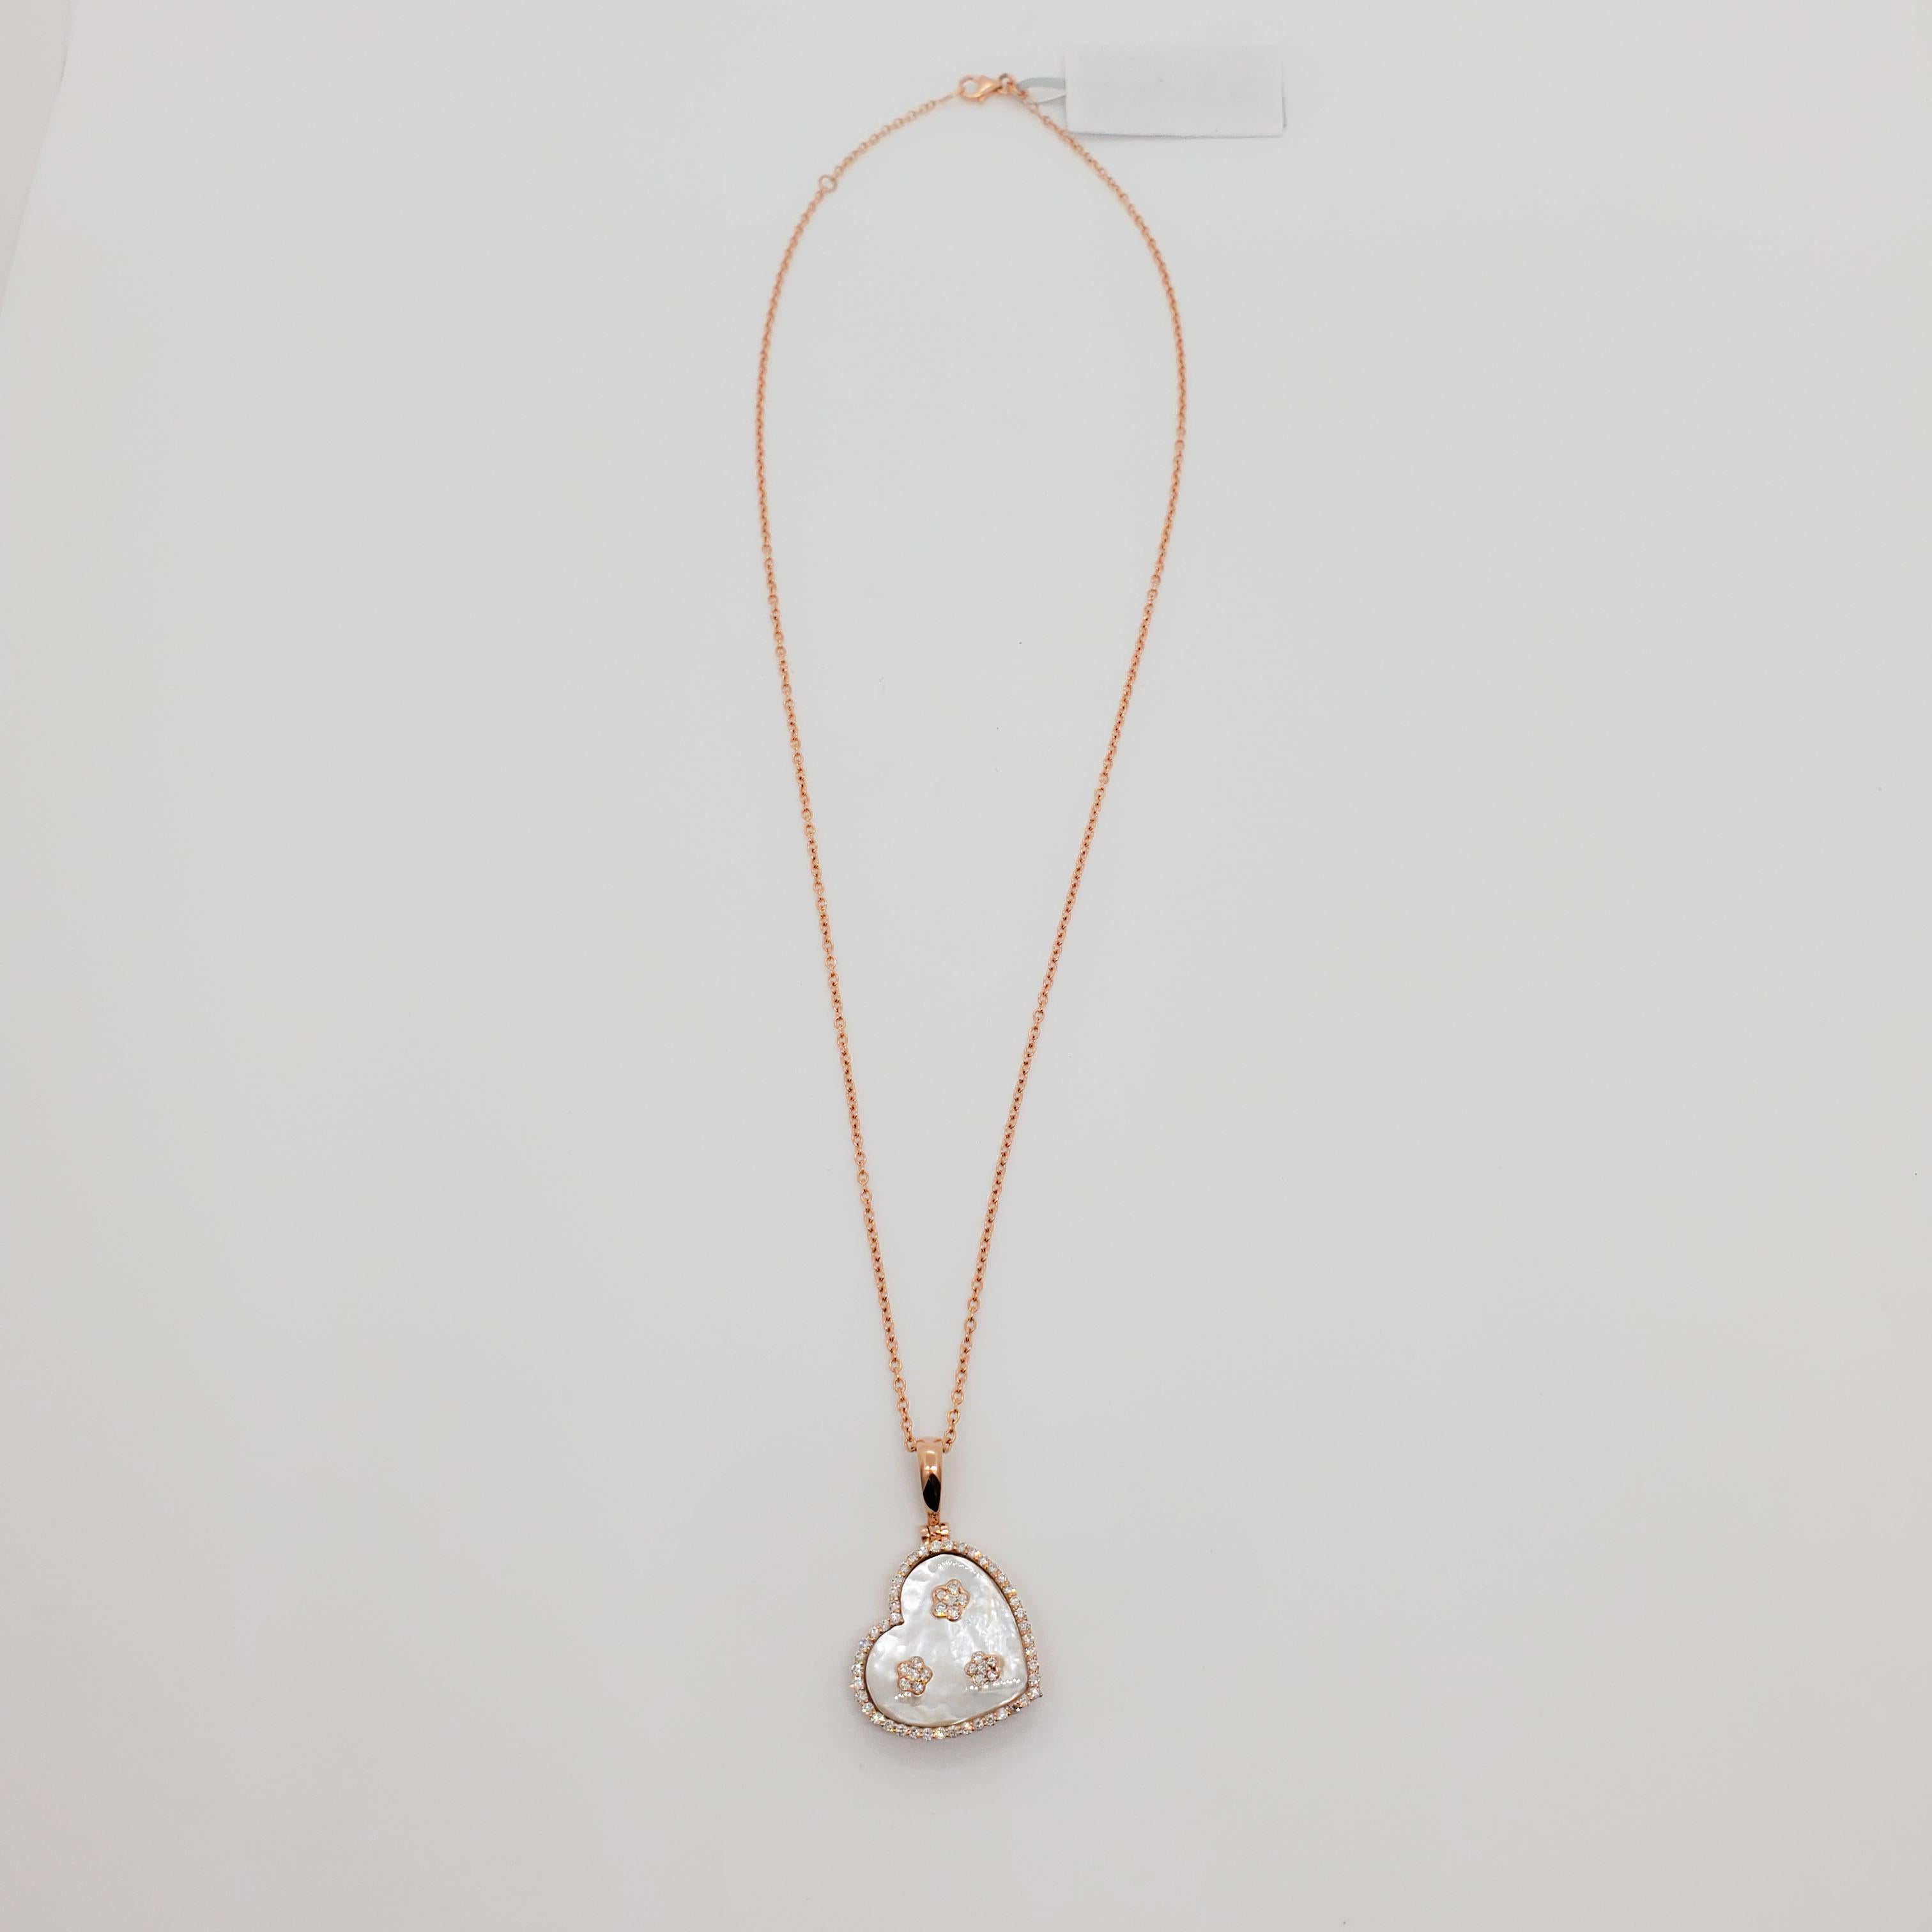 mother of pearl heart necklace